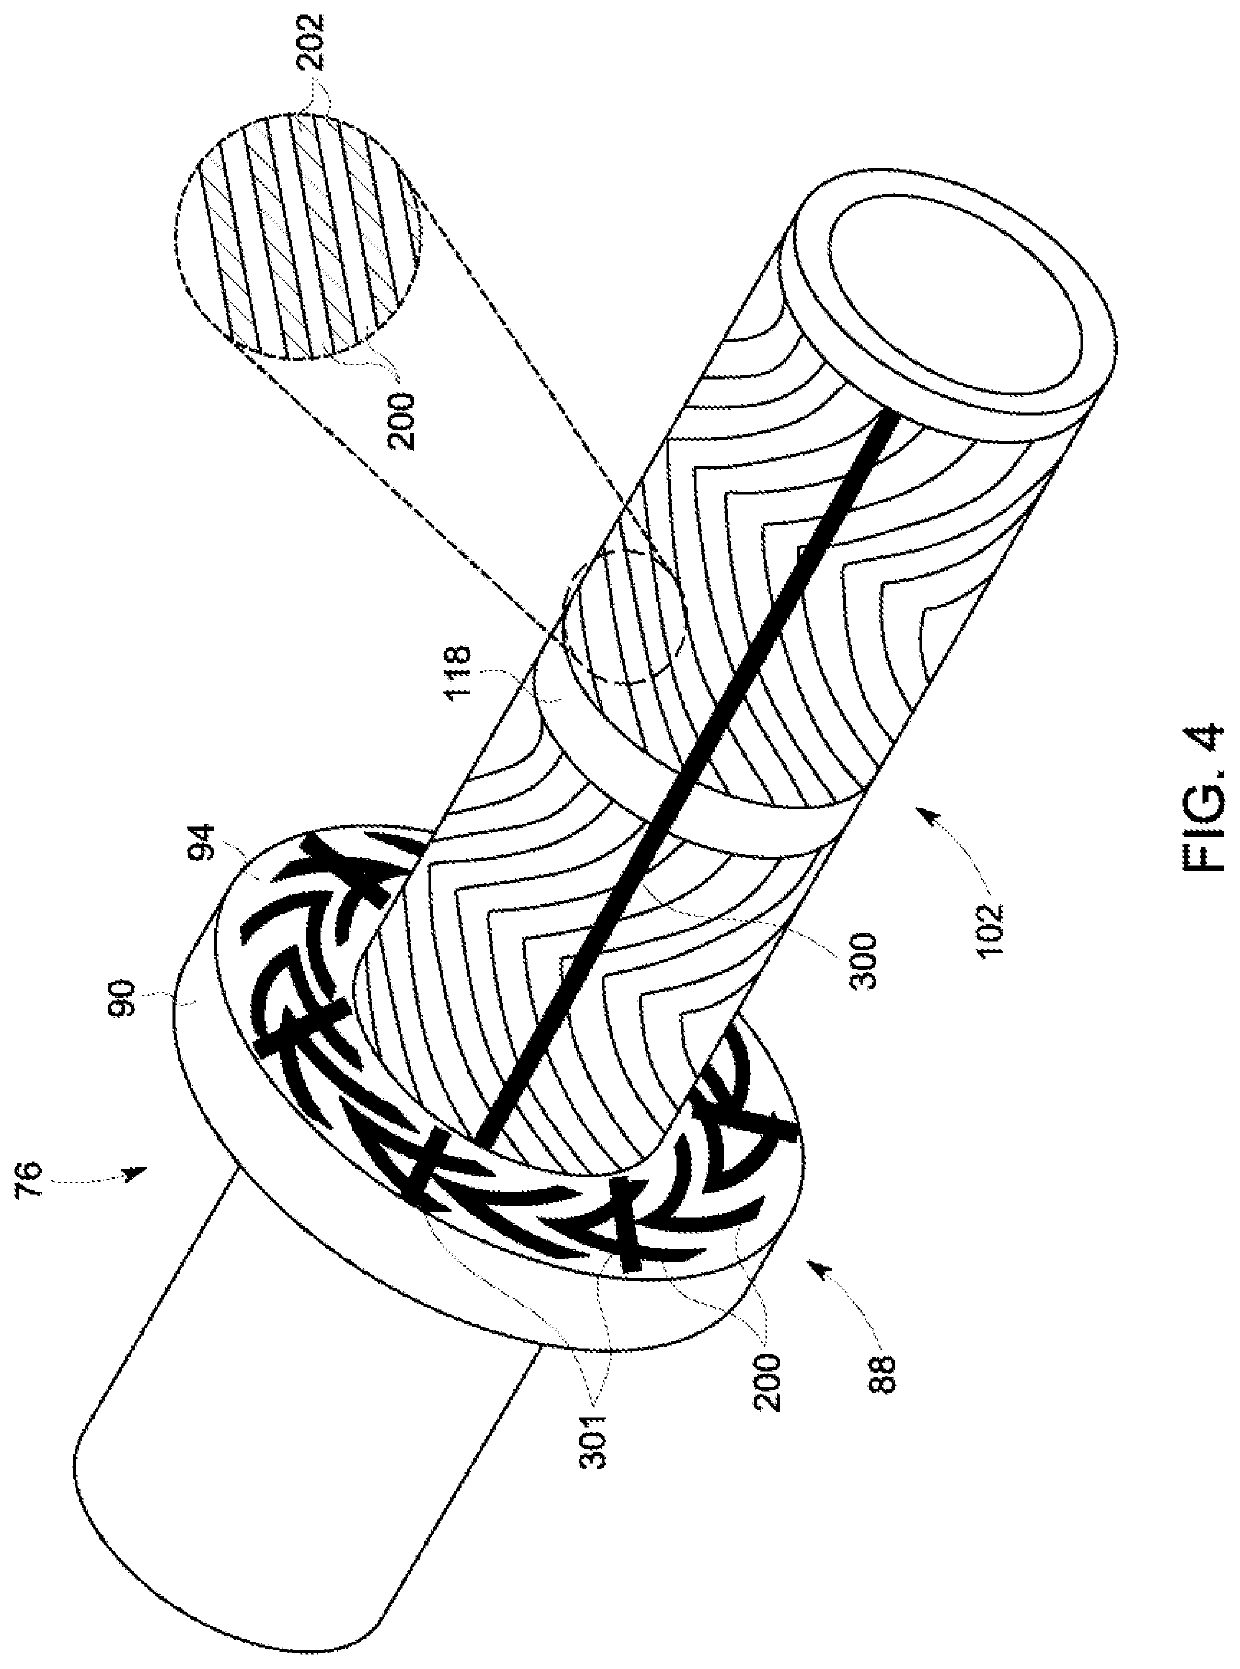 X-Ray Tube Liquid Metal Bearing Structure For Reducing Trapped Gases